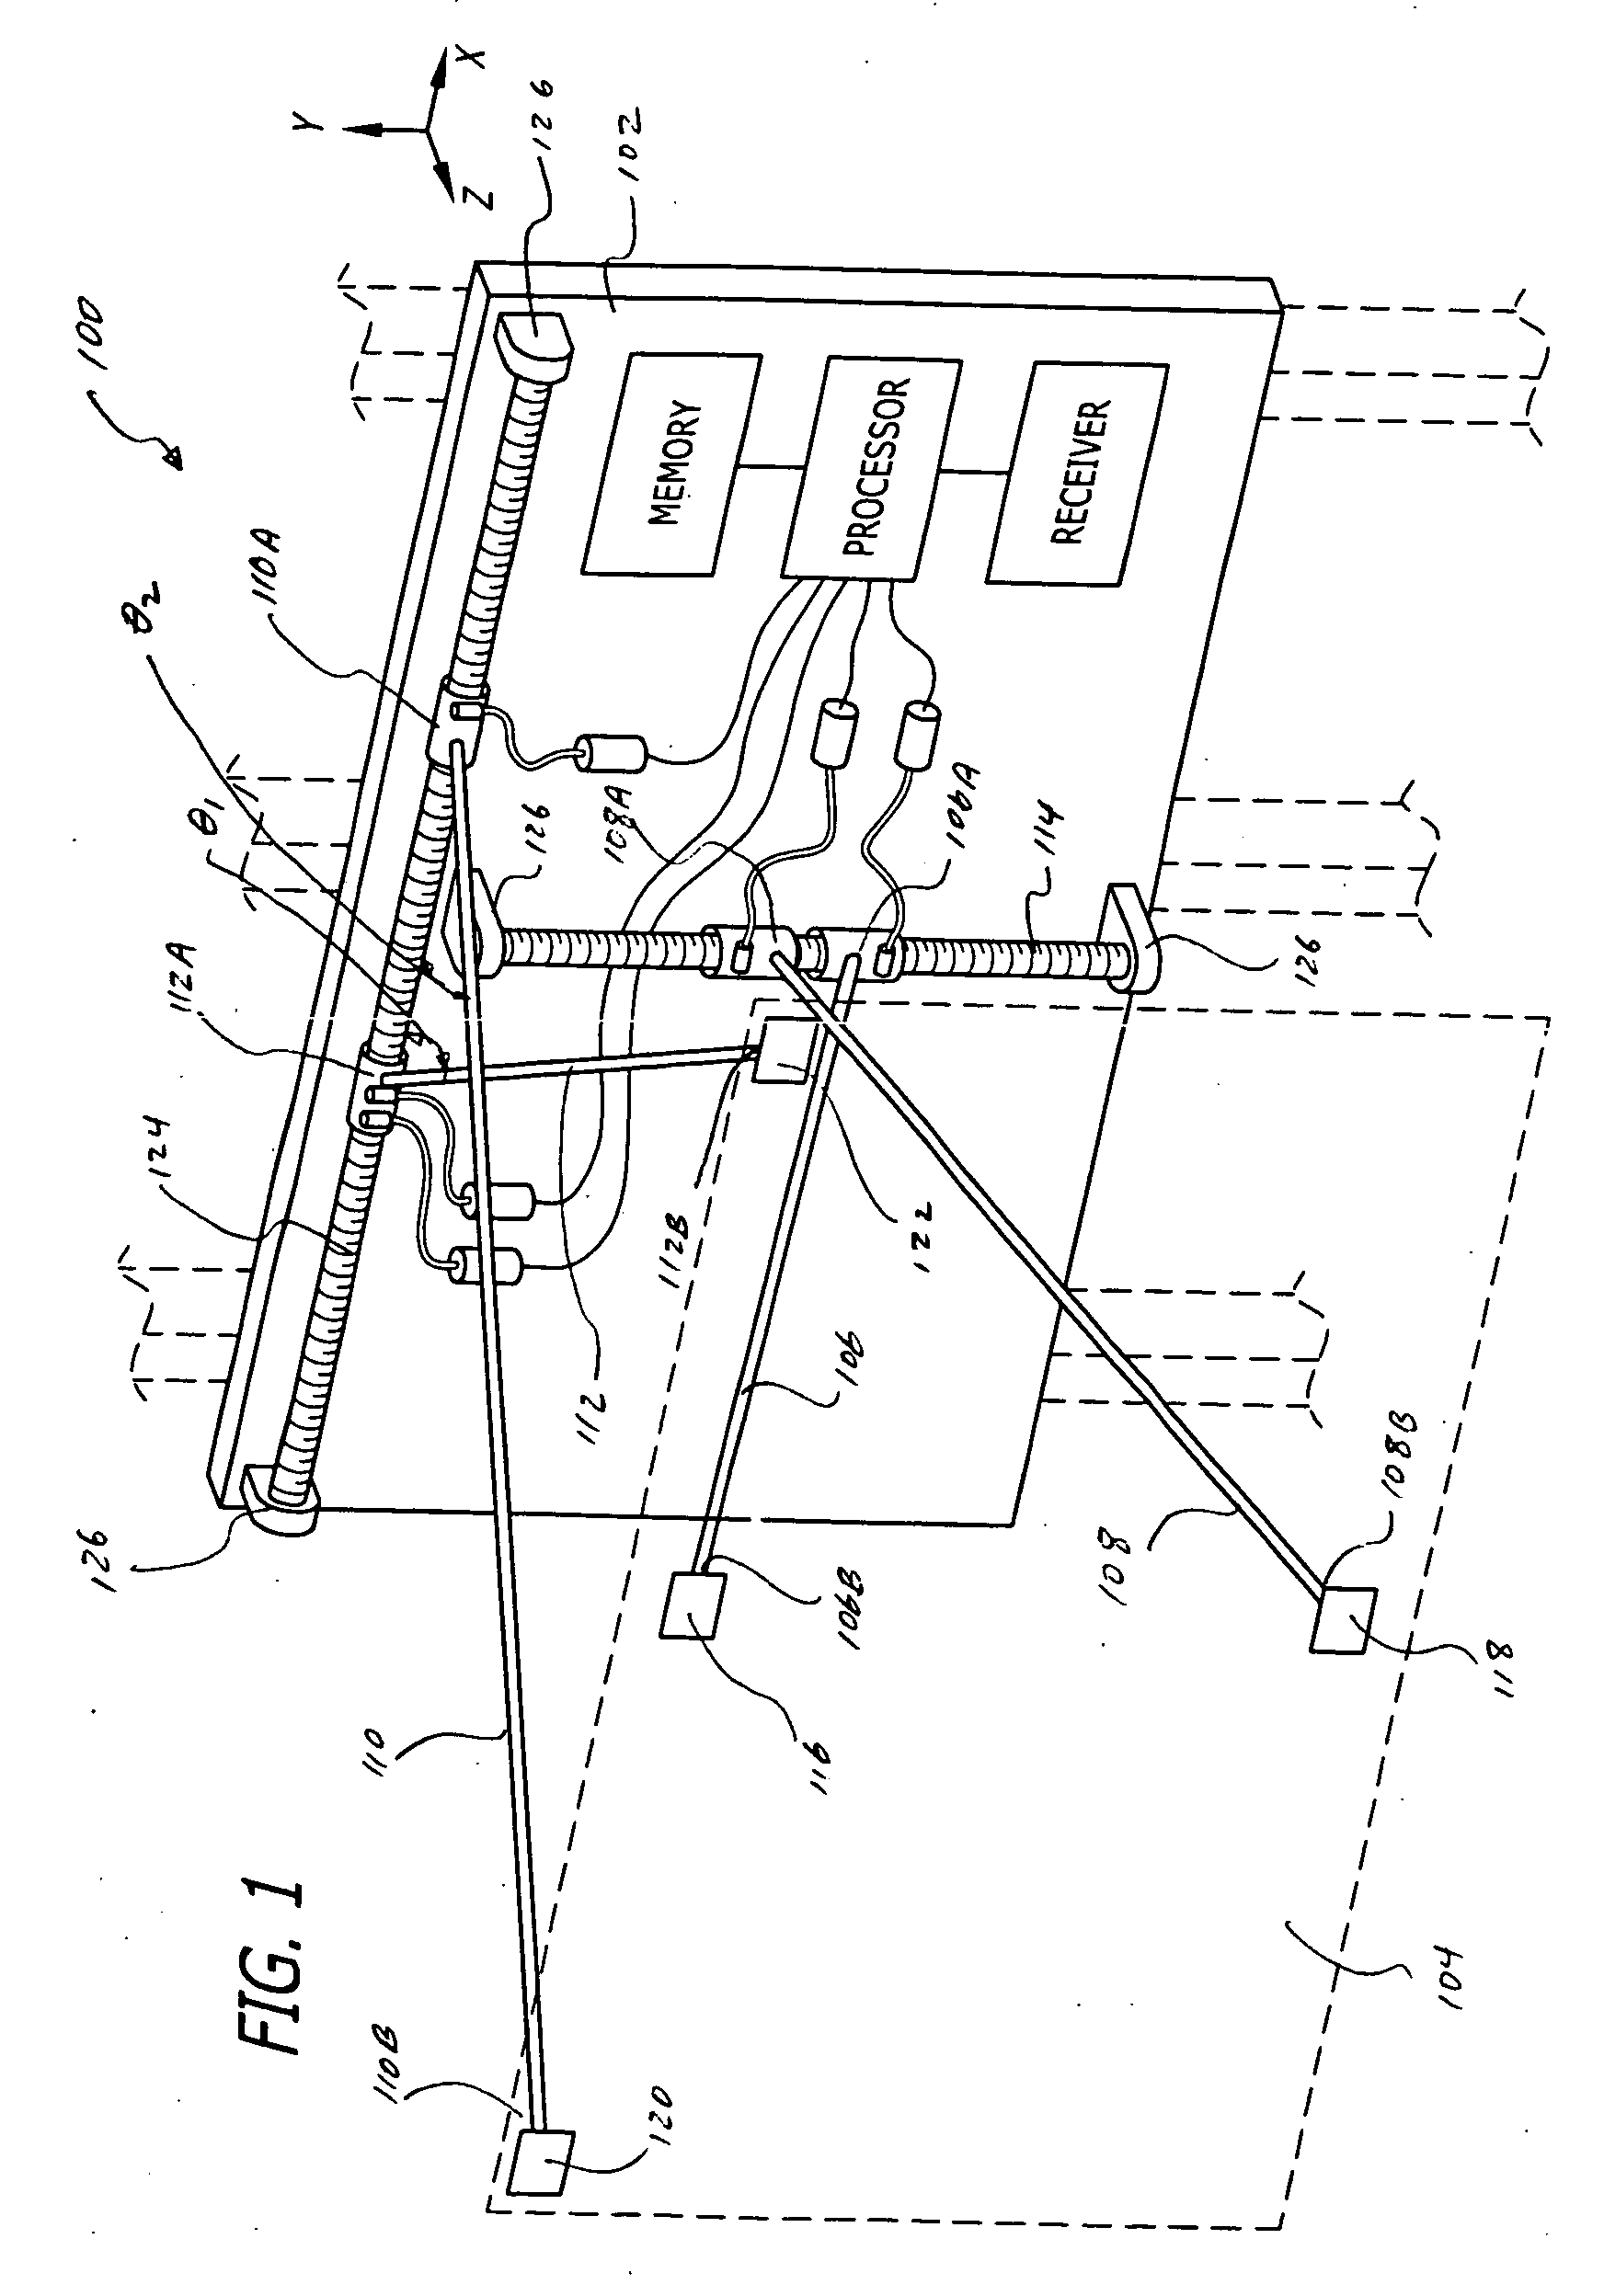 Mounting system capable of adjusting viewing angle of a monitor